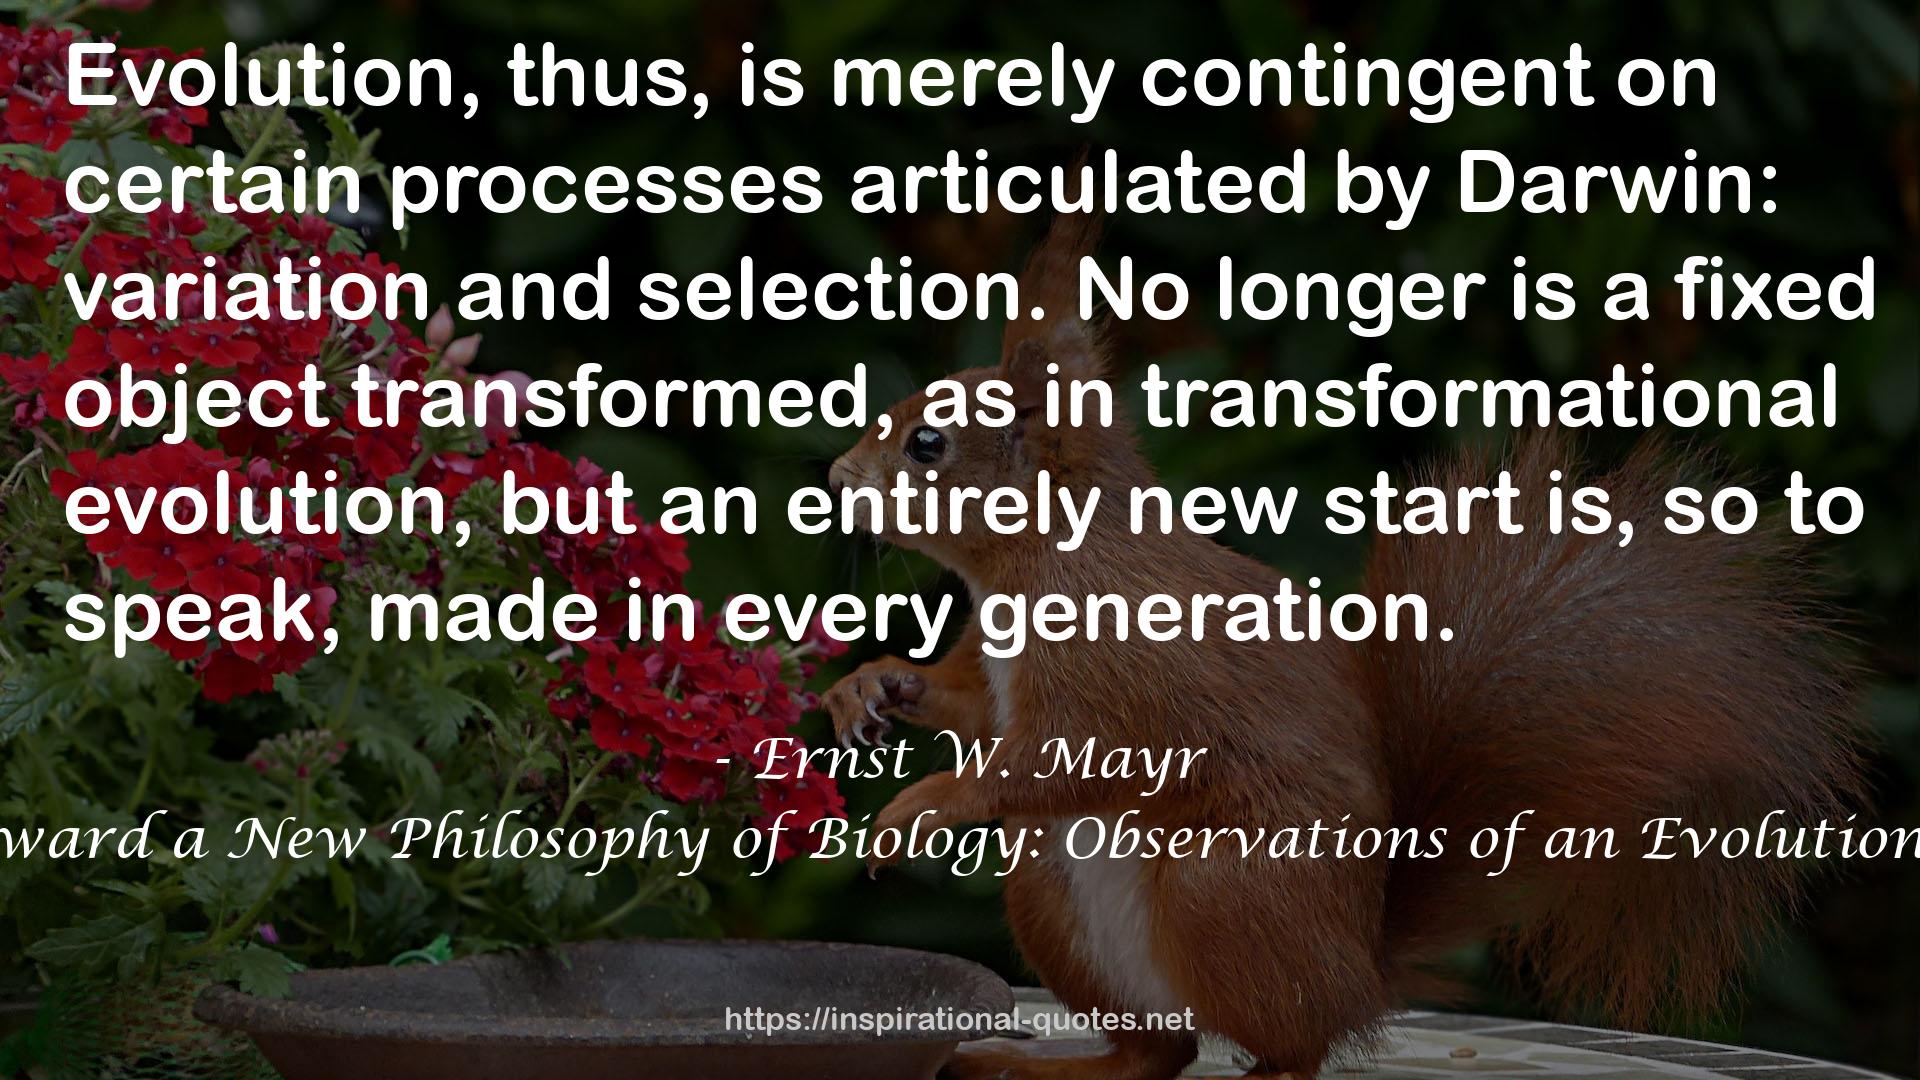 Toward a New Philosophy of Biology: Observations of an Evolutionist QUOTES